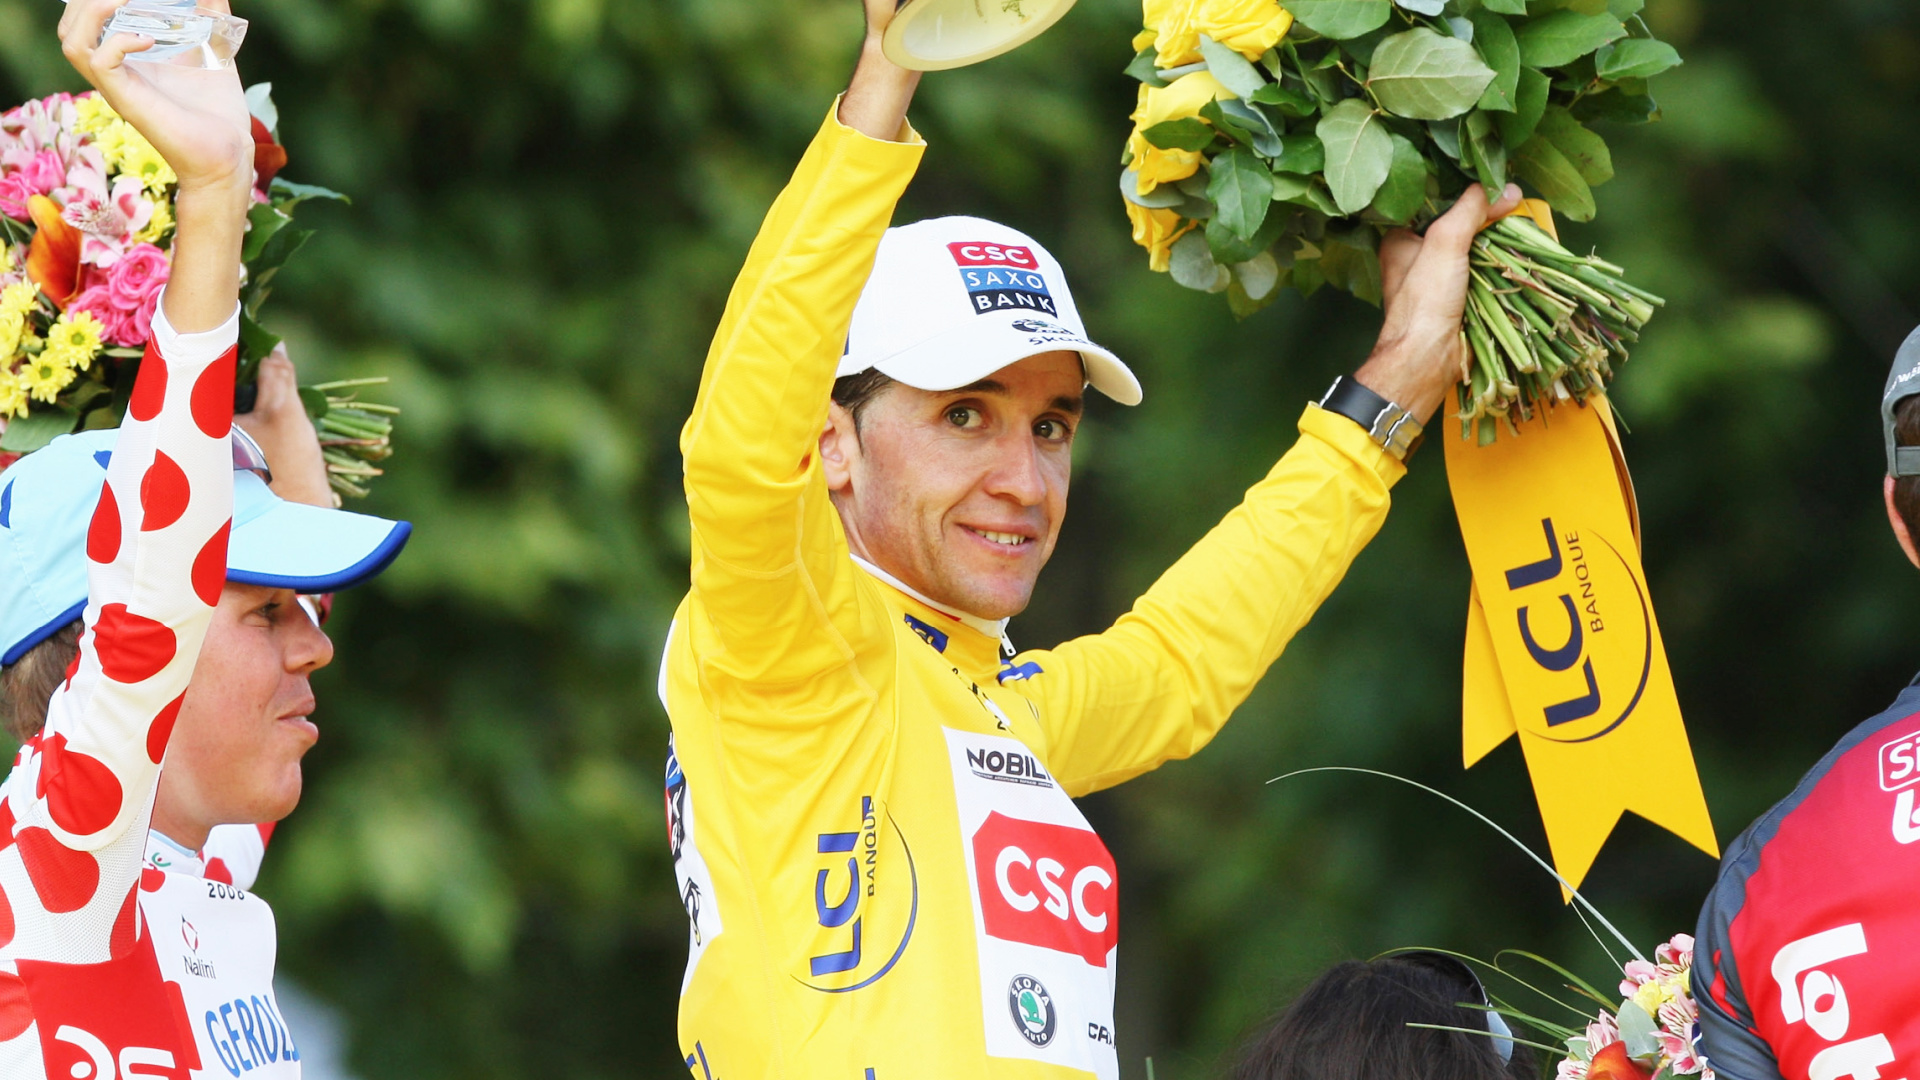 What happened to Carlos Sastre, the unexpected winner of the 2008 Tour de France?